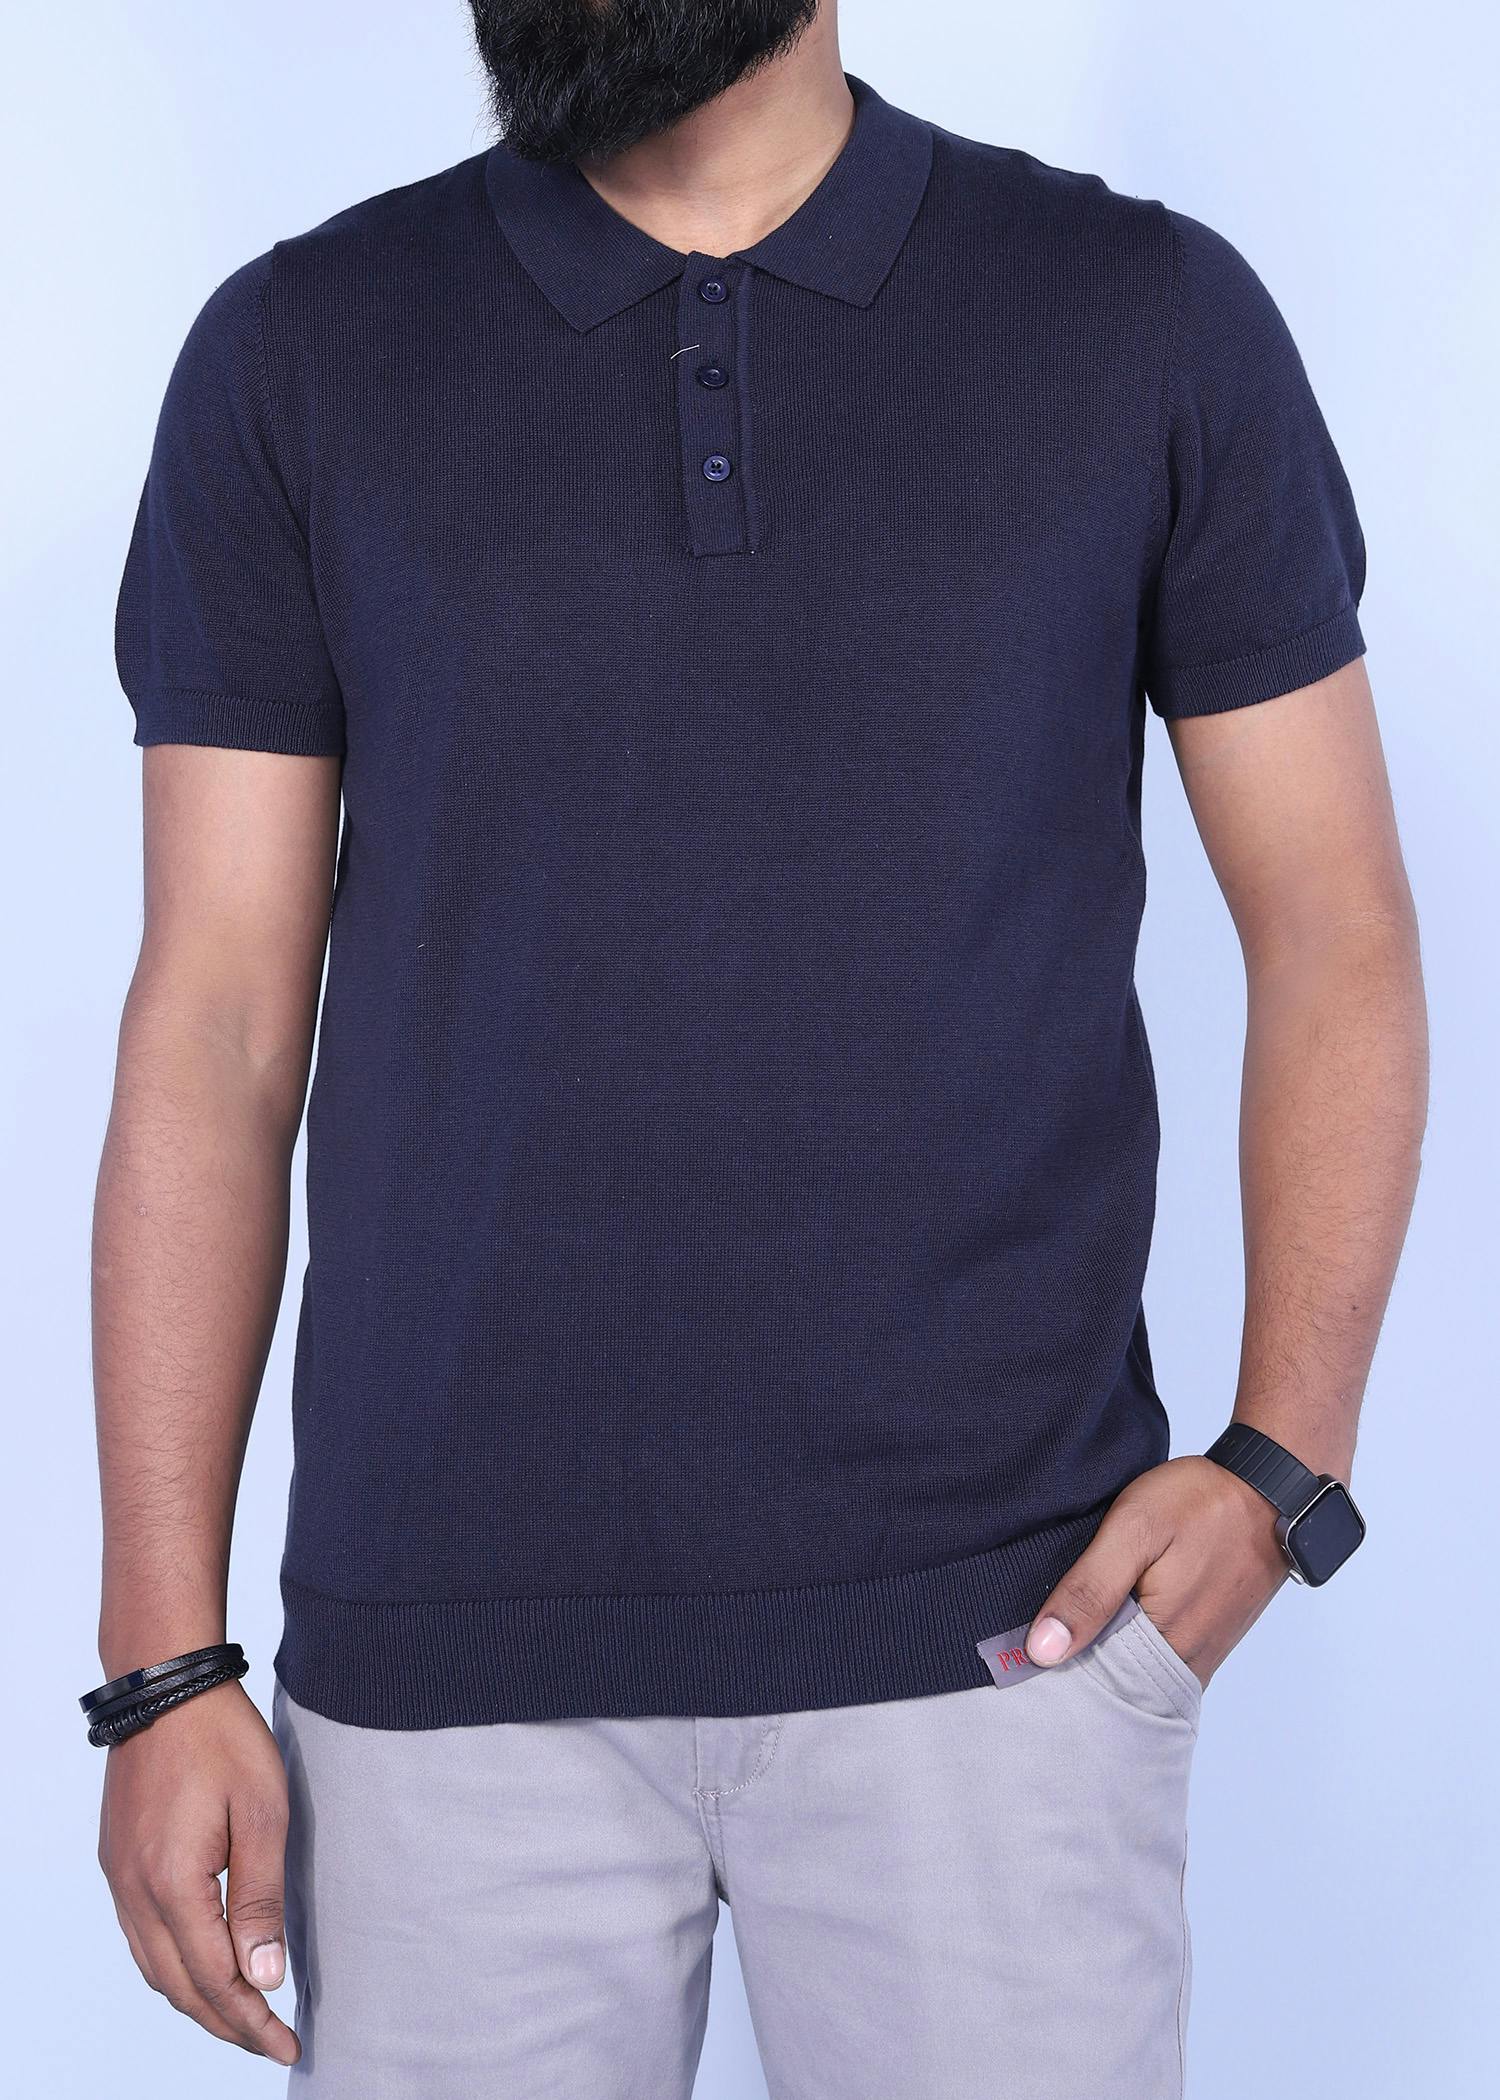 nightingale viii polo navy color half front view